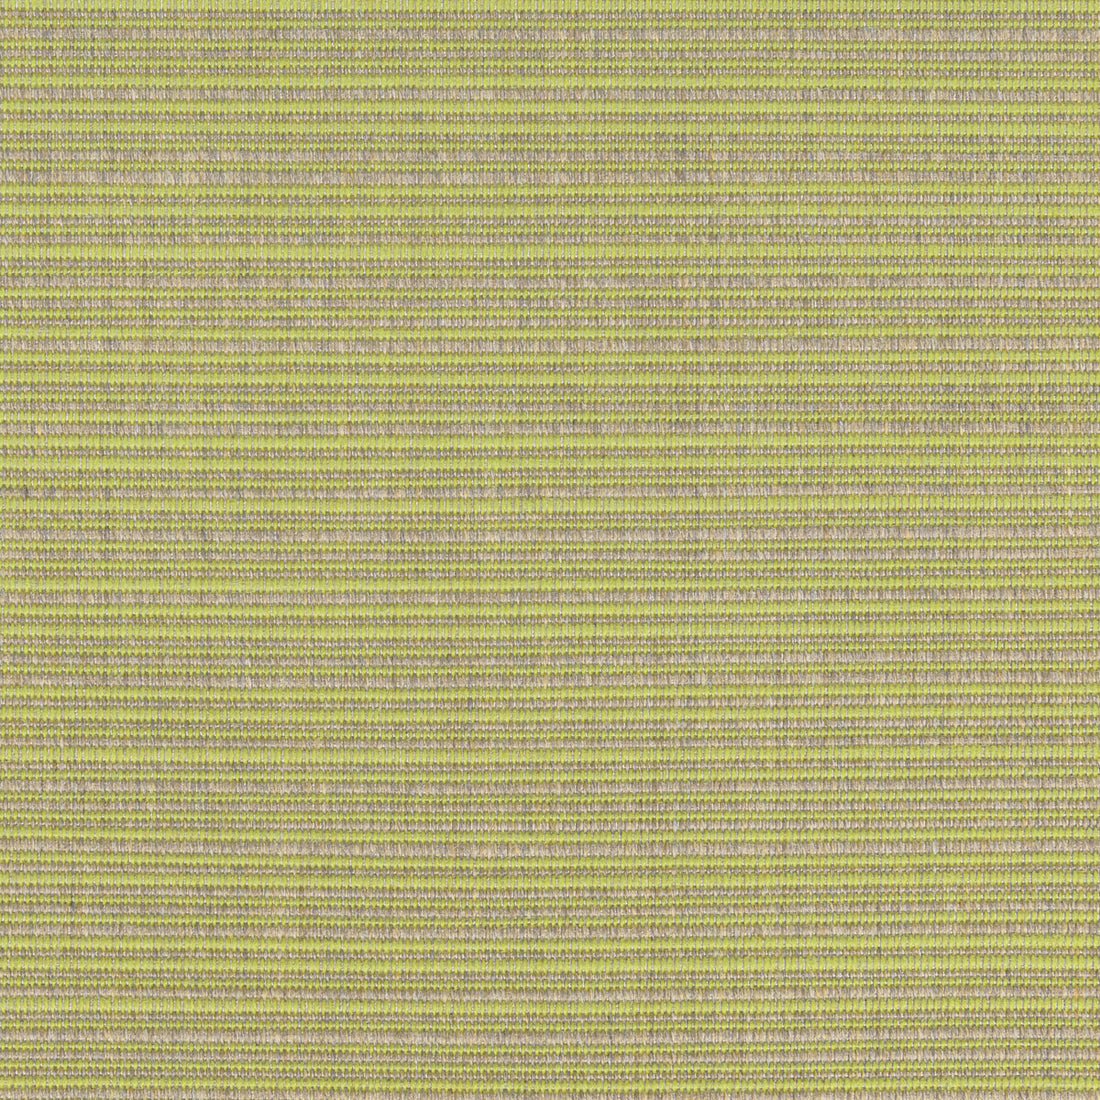 Kravet Basics fabric in 36842-23 color - pattern 36842.23.0 - by Kravet Basics in the Indoor / Outdoor collection